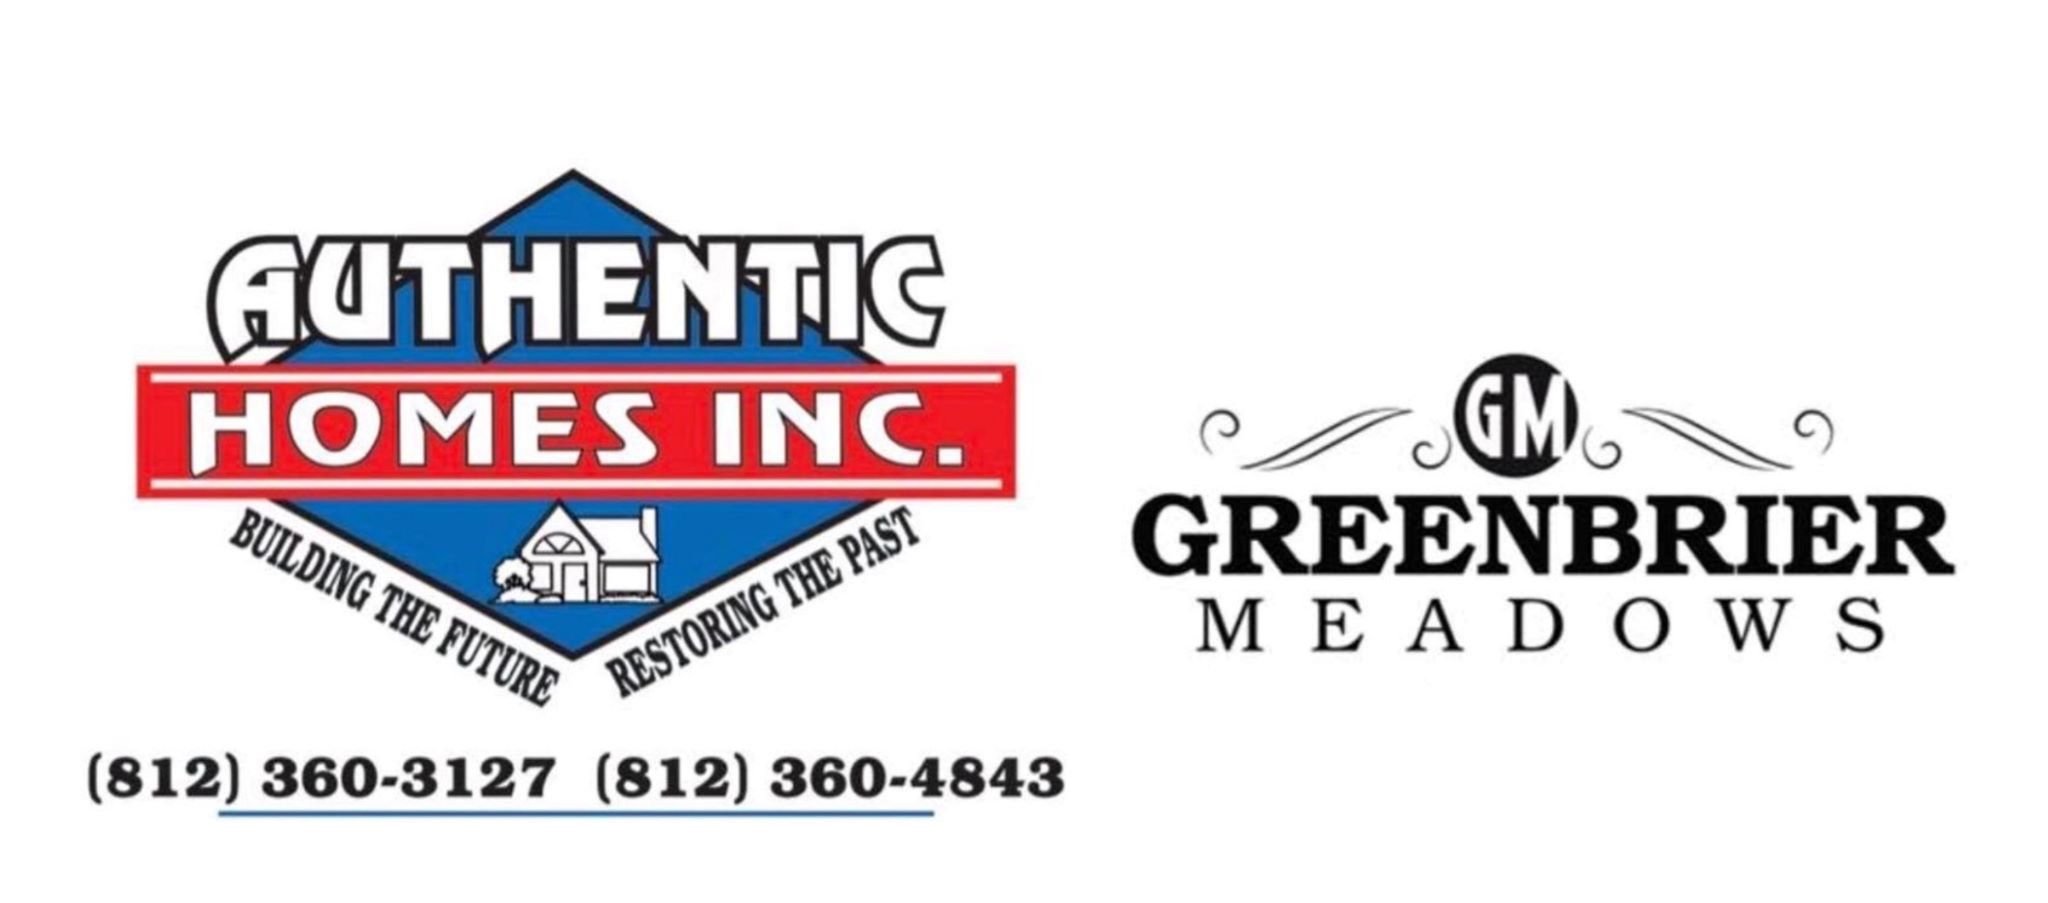 Authentic Homes INC | Membership Directory